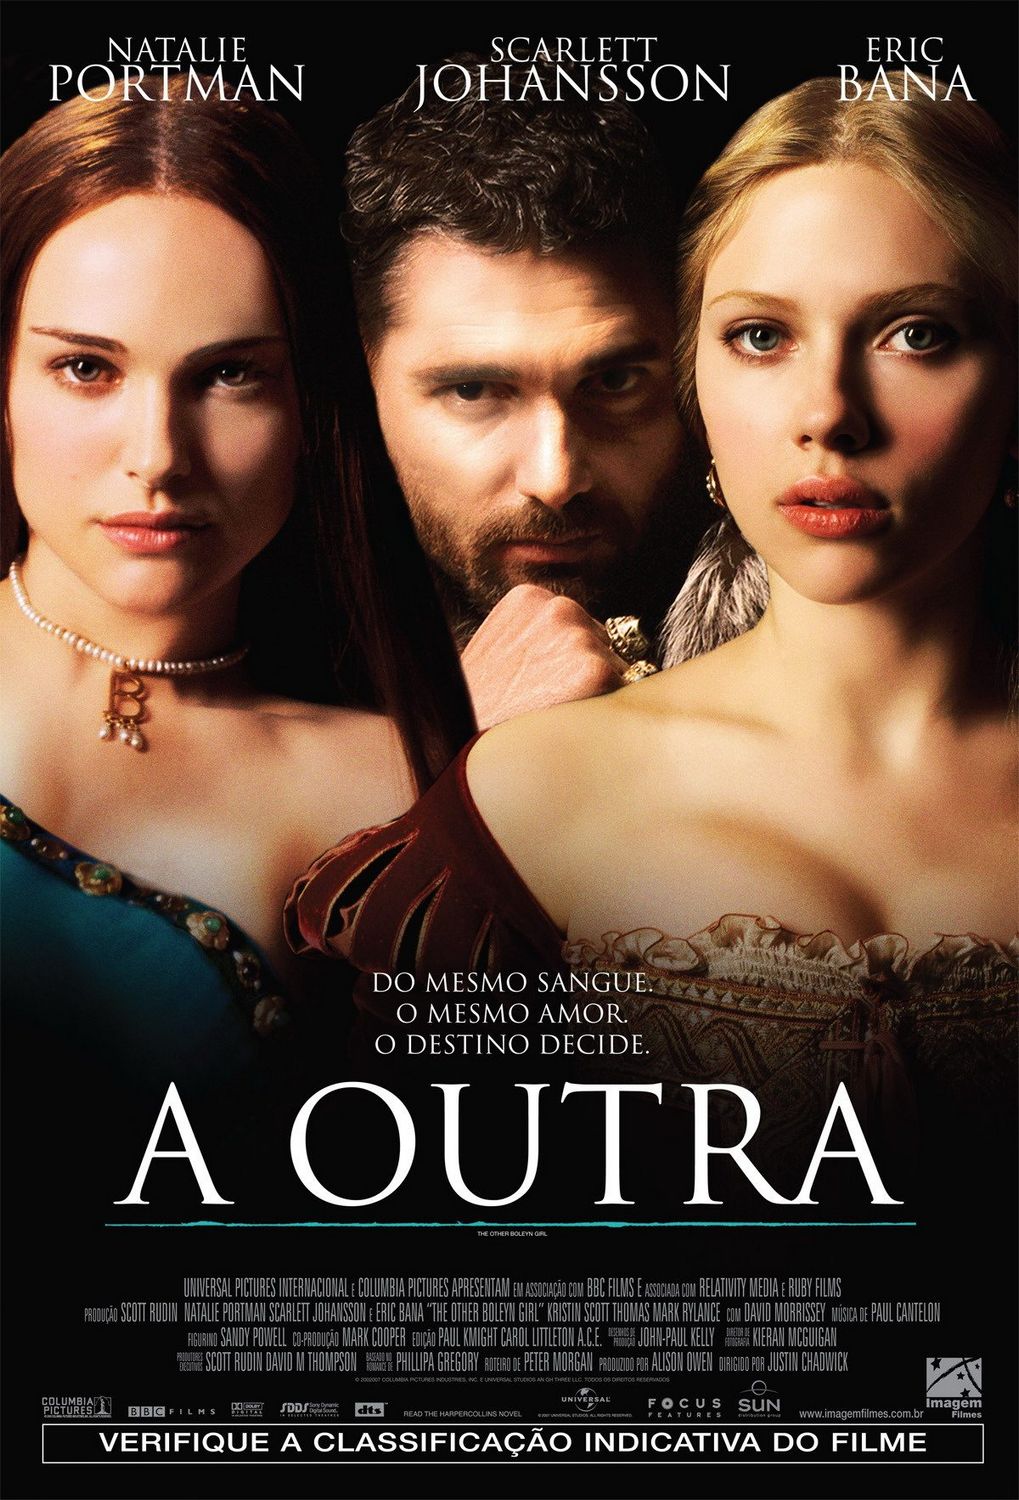 Extra Large Movie Poster Image for The Other Boleyn Girl (#3 of 3)